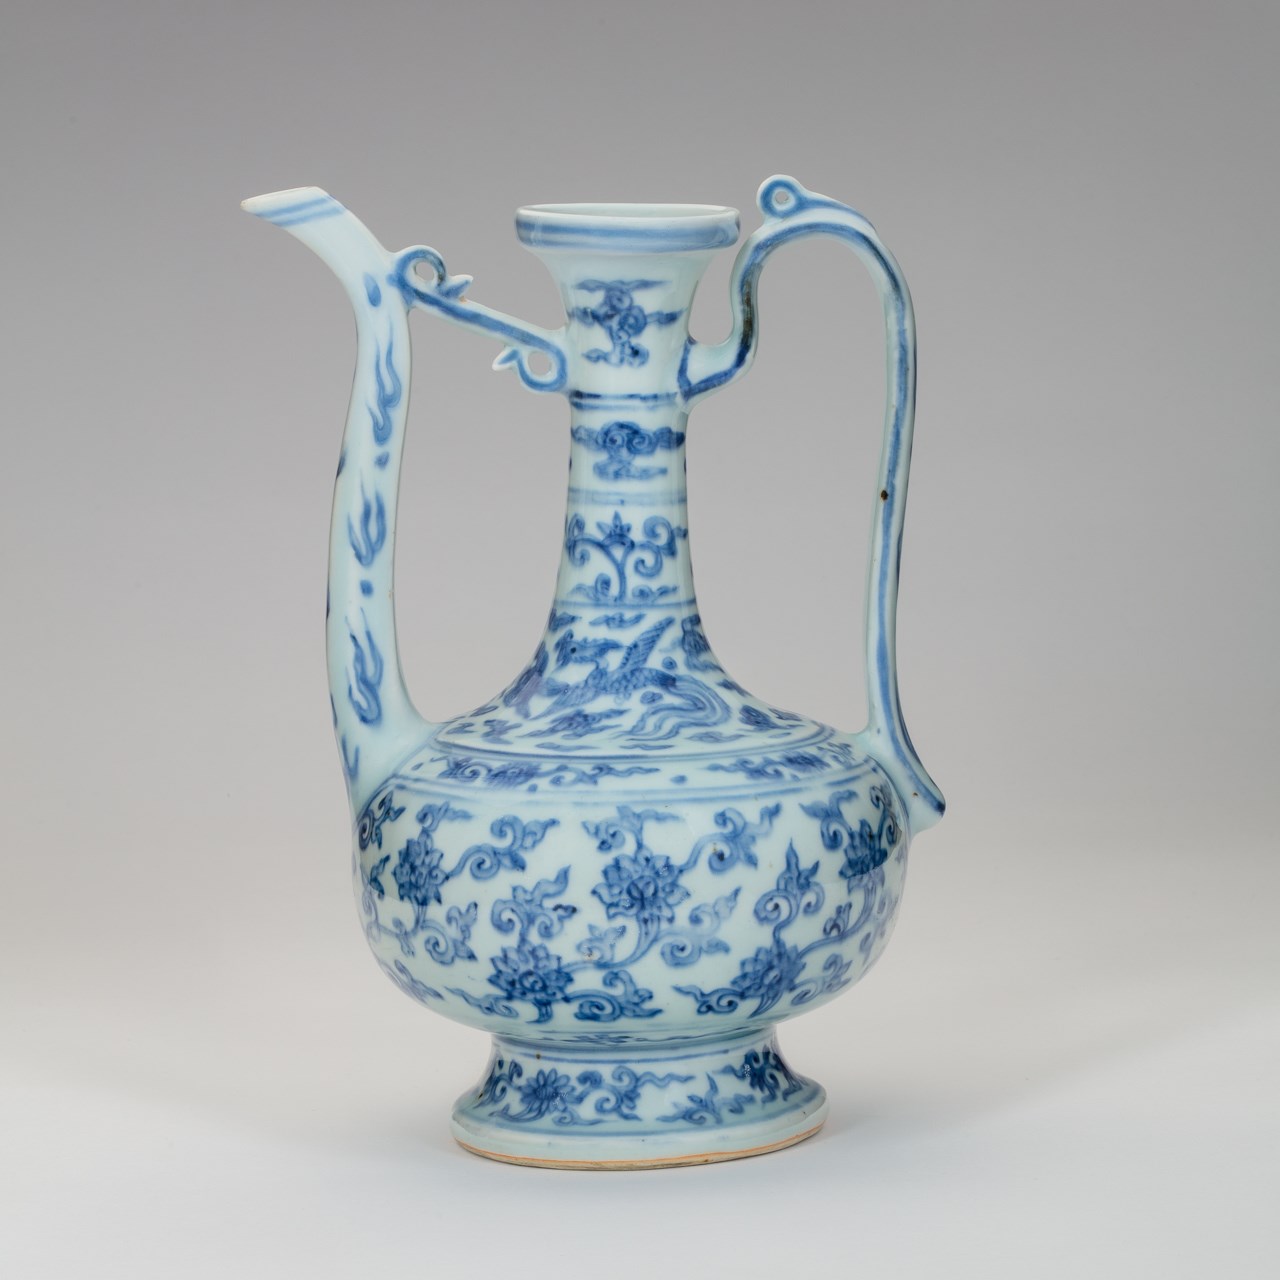 A MING BLUE-AND-WHITE EWER WITH XUANDE MARK 明宣德款